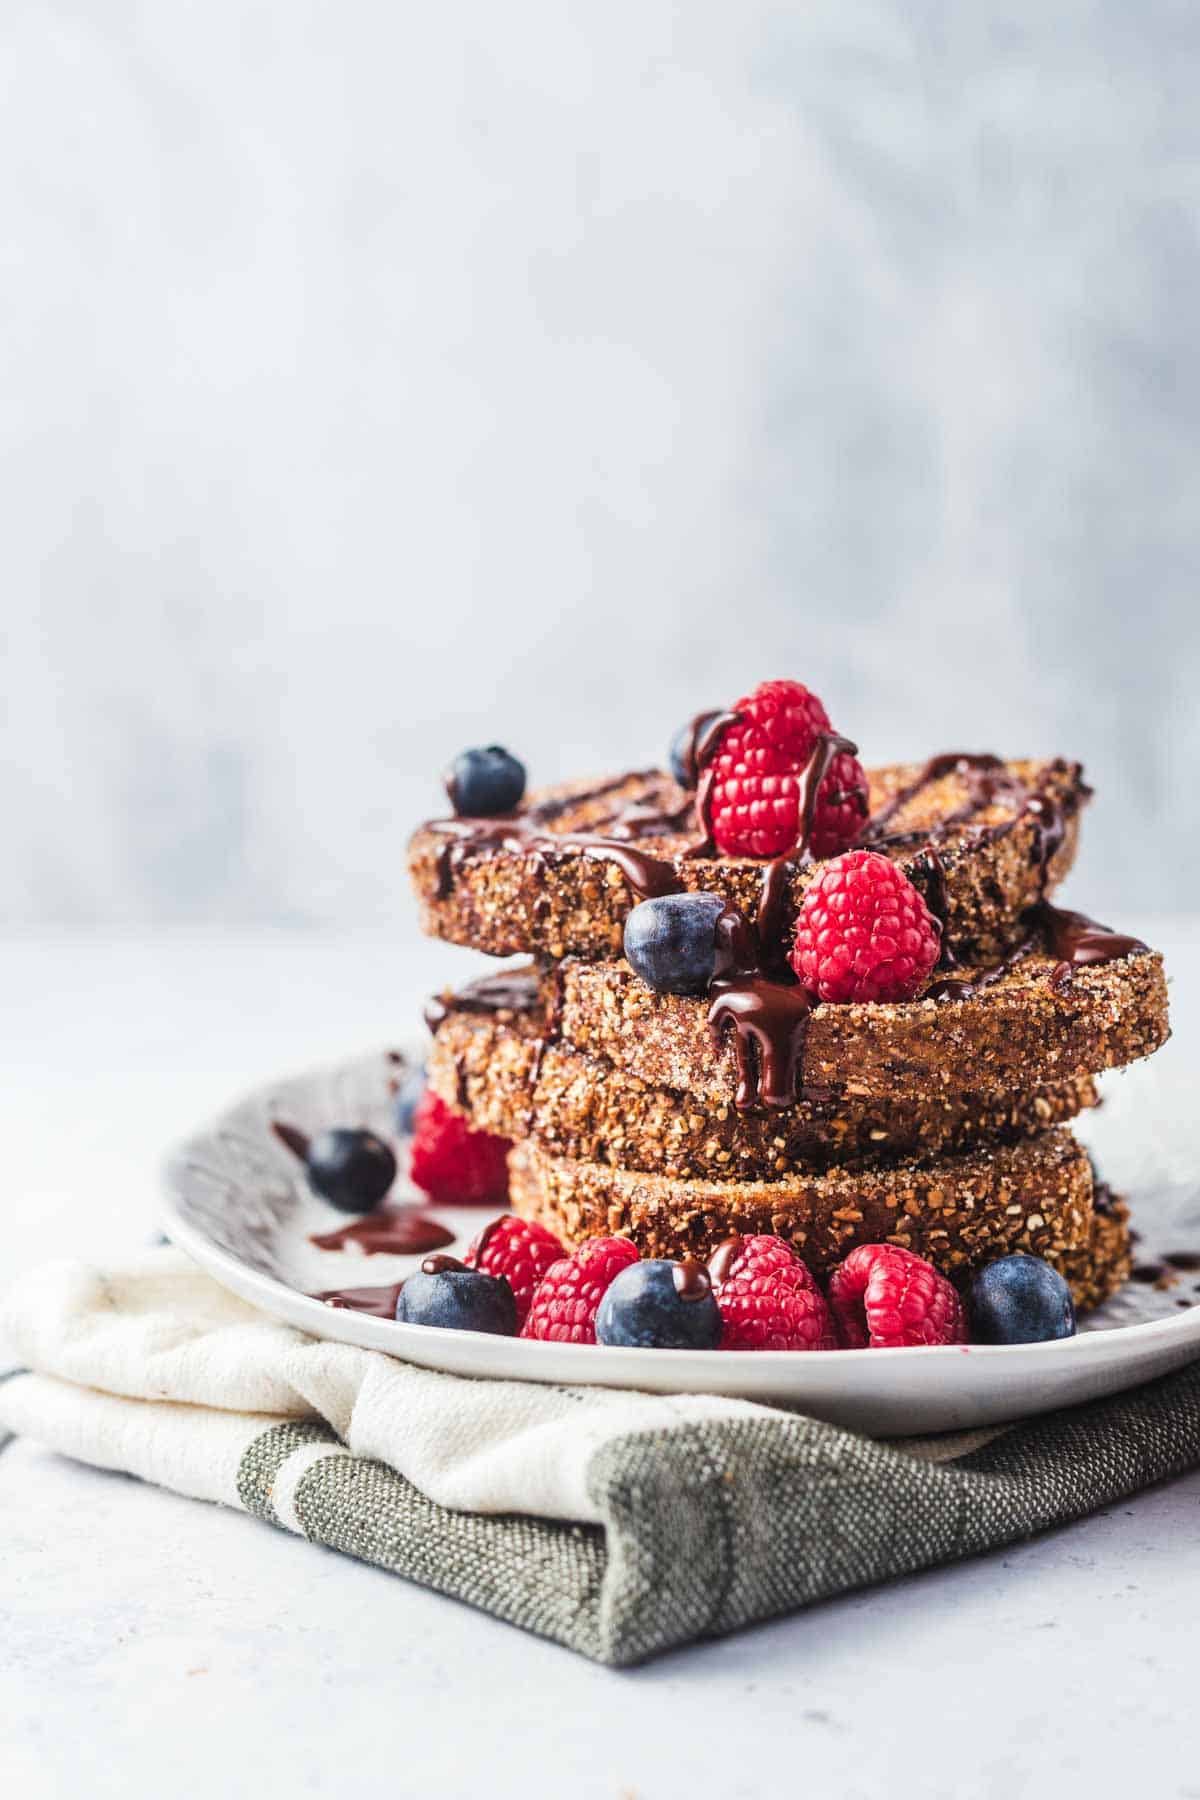 Churro french toast stacked on a plate and topped with berries and chocolate.